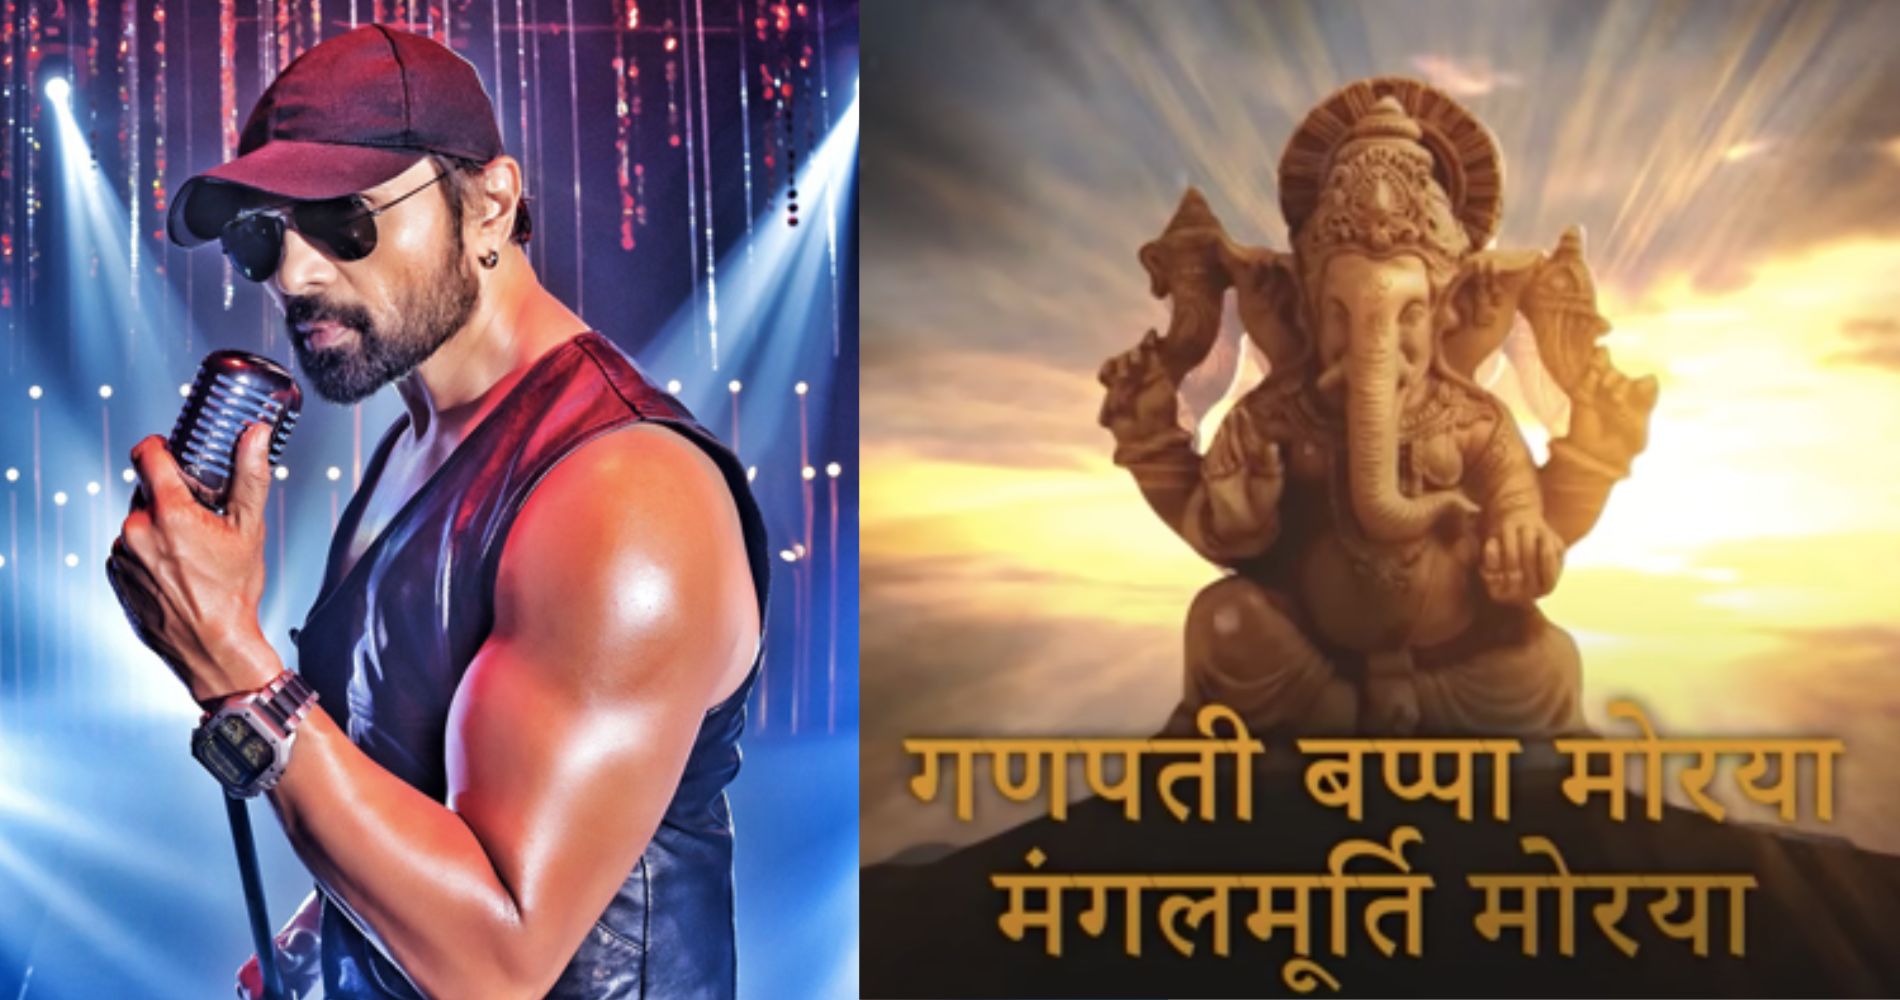 On the occassion of Ganesh Chaturthi Himesh Reshammiya releases the